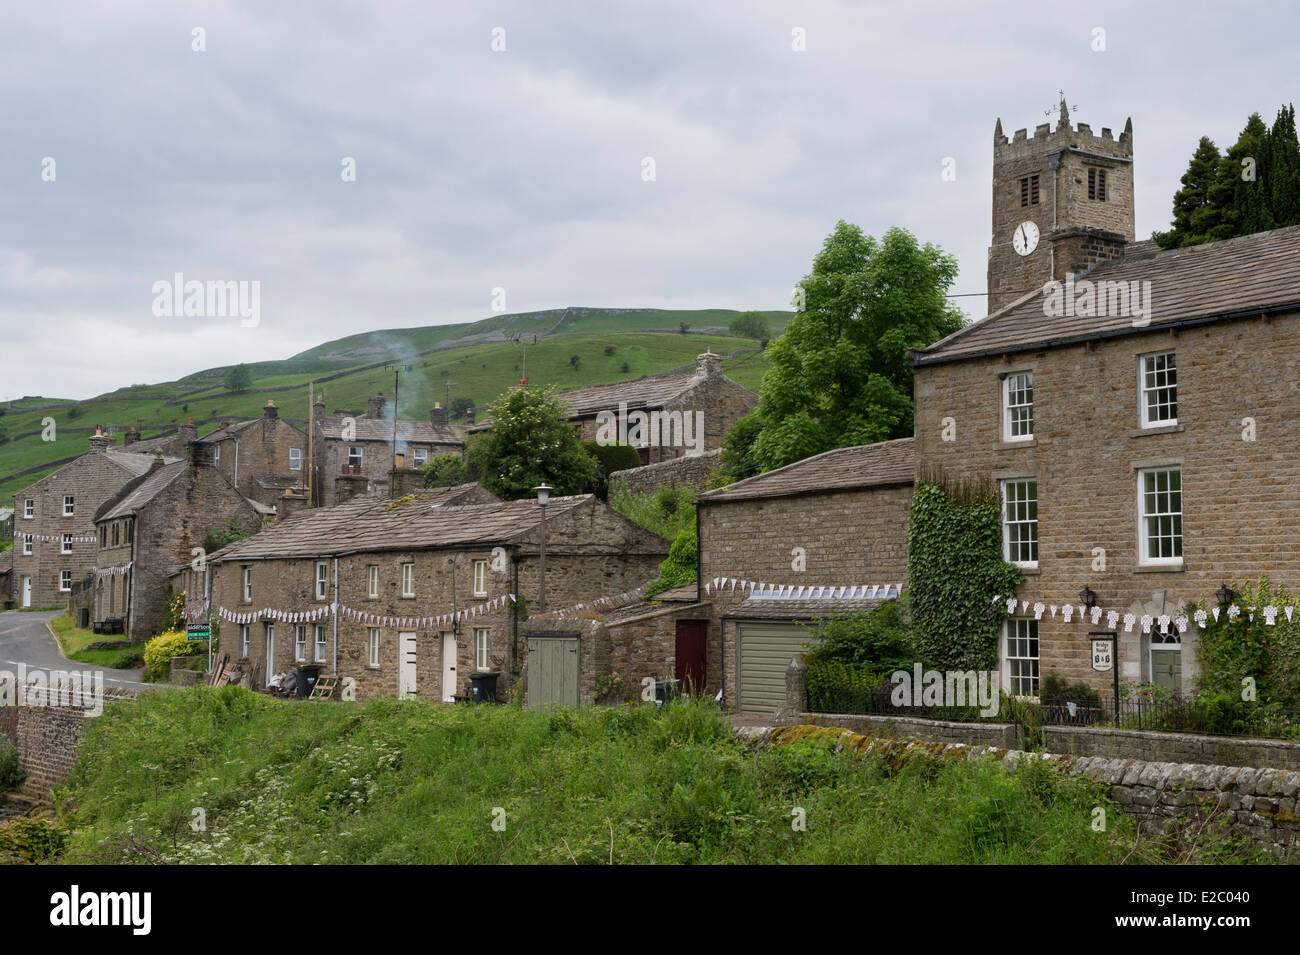 Traditional stone cottages lining road, church tower & rolling hills beyond - Muker, small rural village in Swaledale, Yorkshire Dales, England, UK. Stock Photo